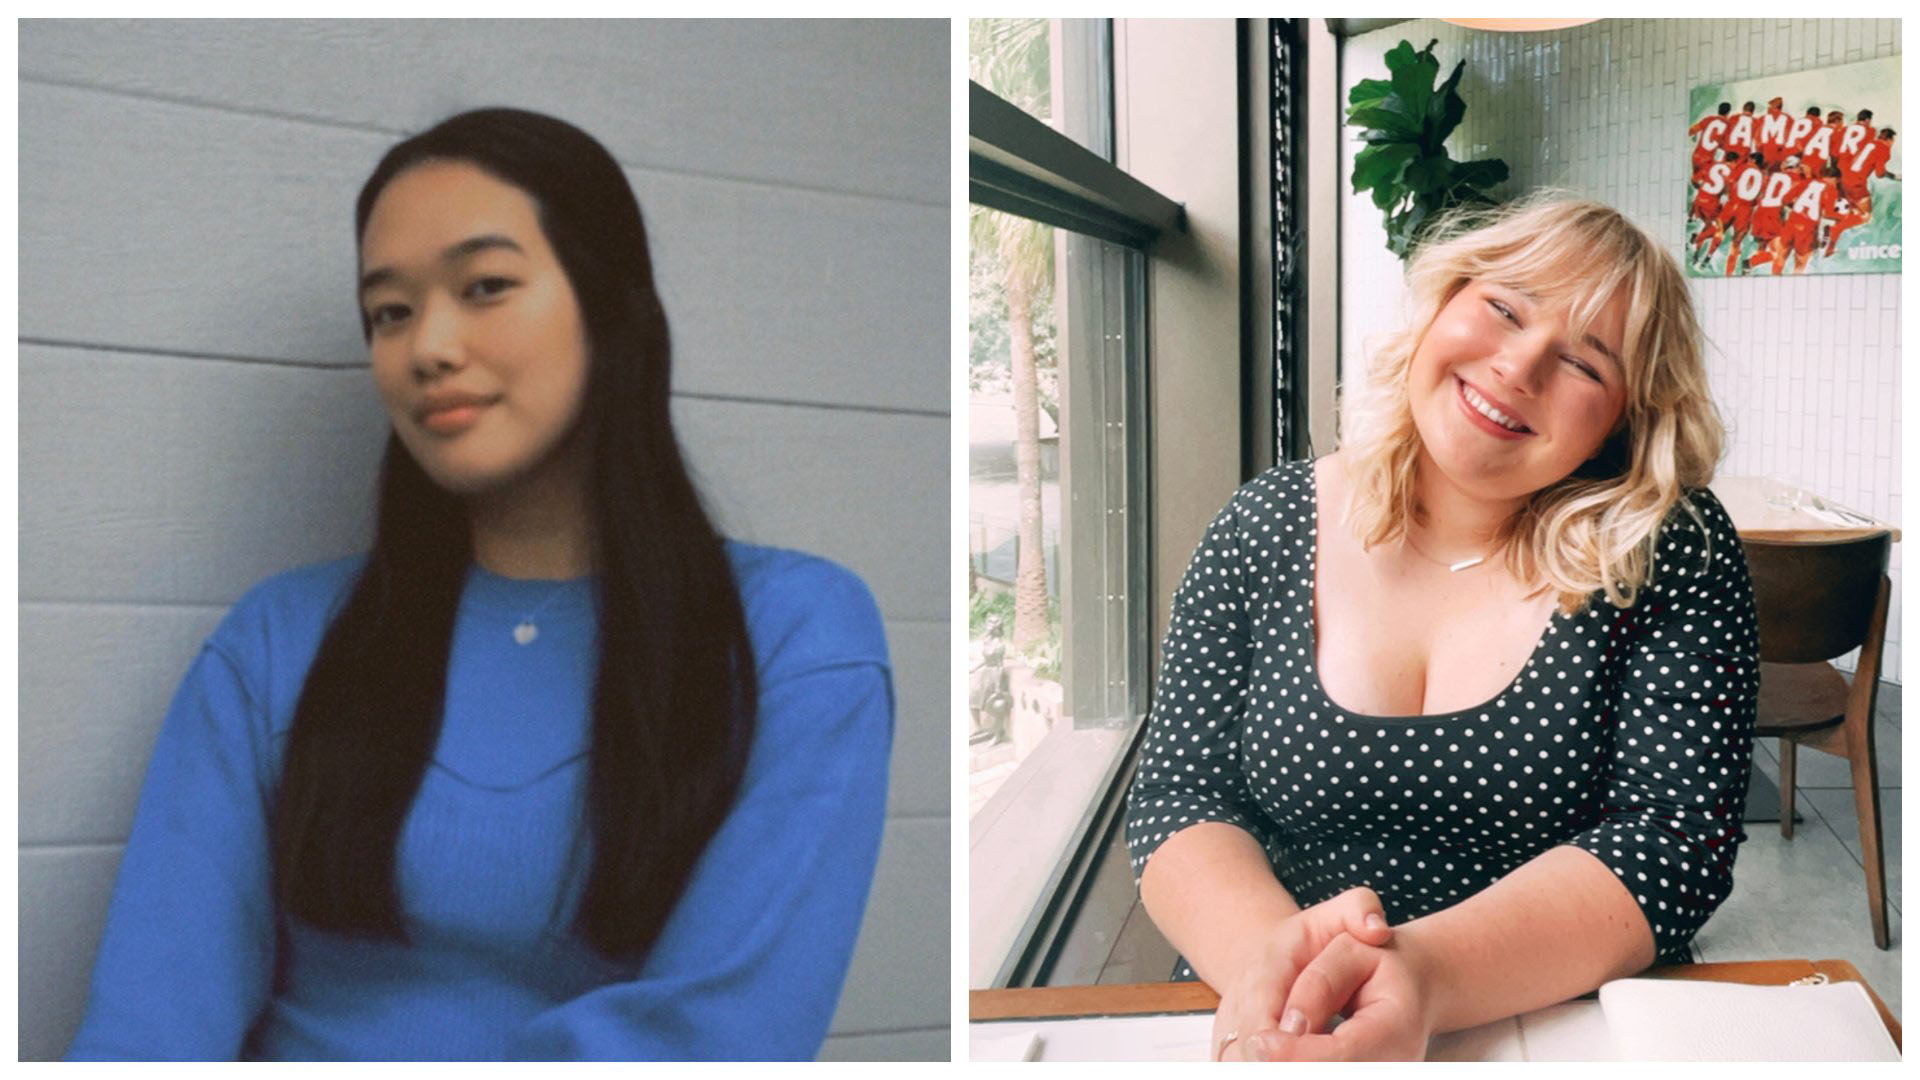 UOW creative writing students Trish Llorando and Anna Moore have received scholarships to attend the ATYP National Studio